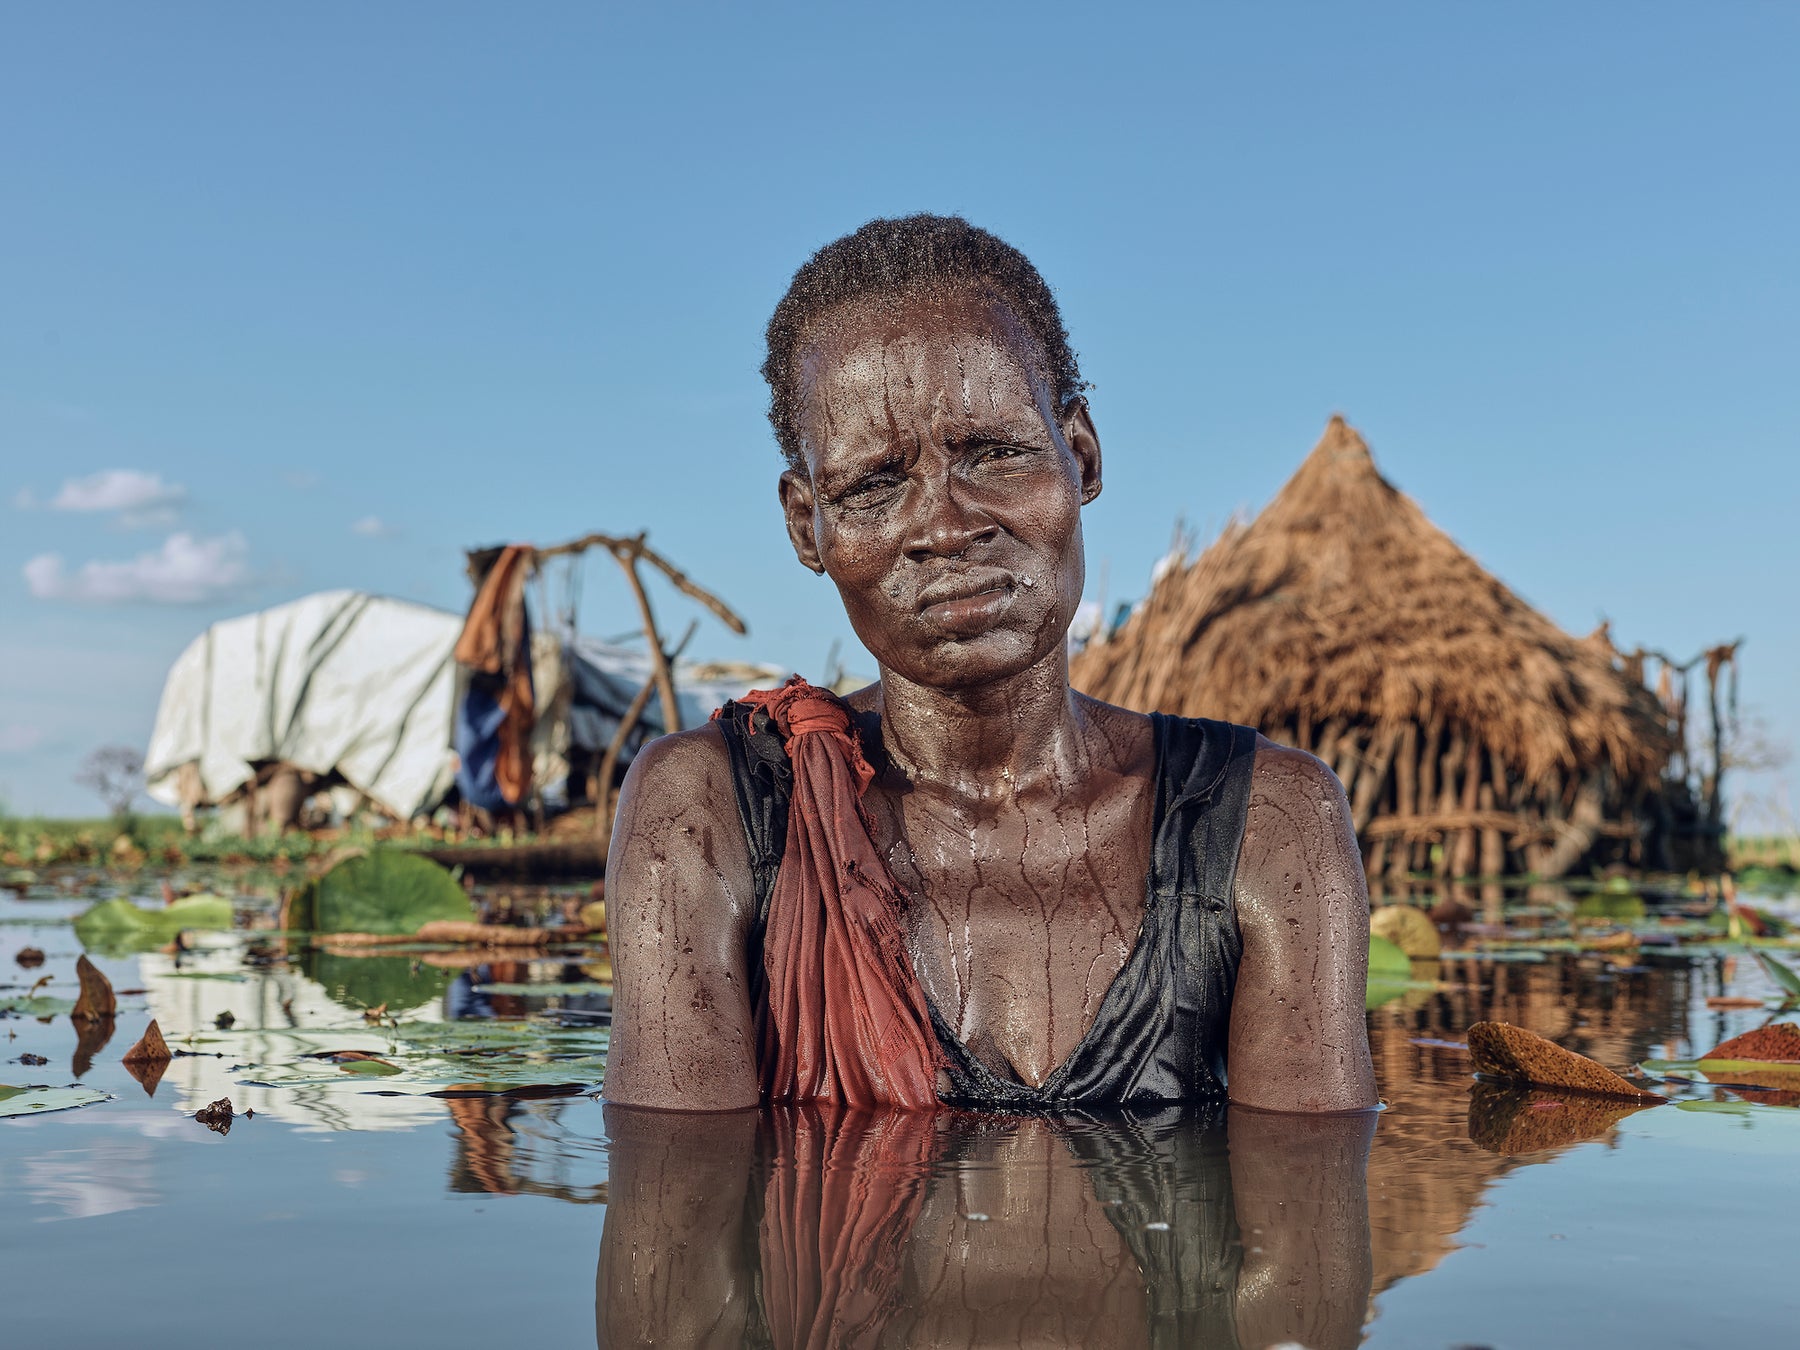 Unyielding Floods – Photographing the Devastation in South Sudan